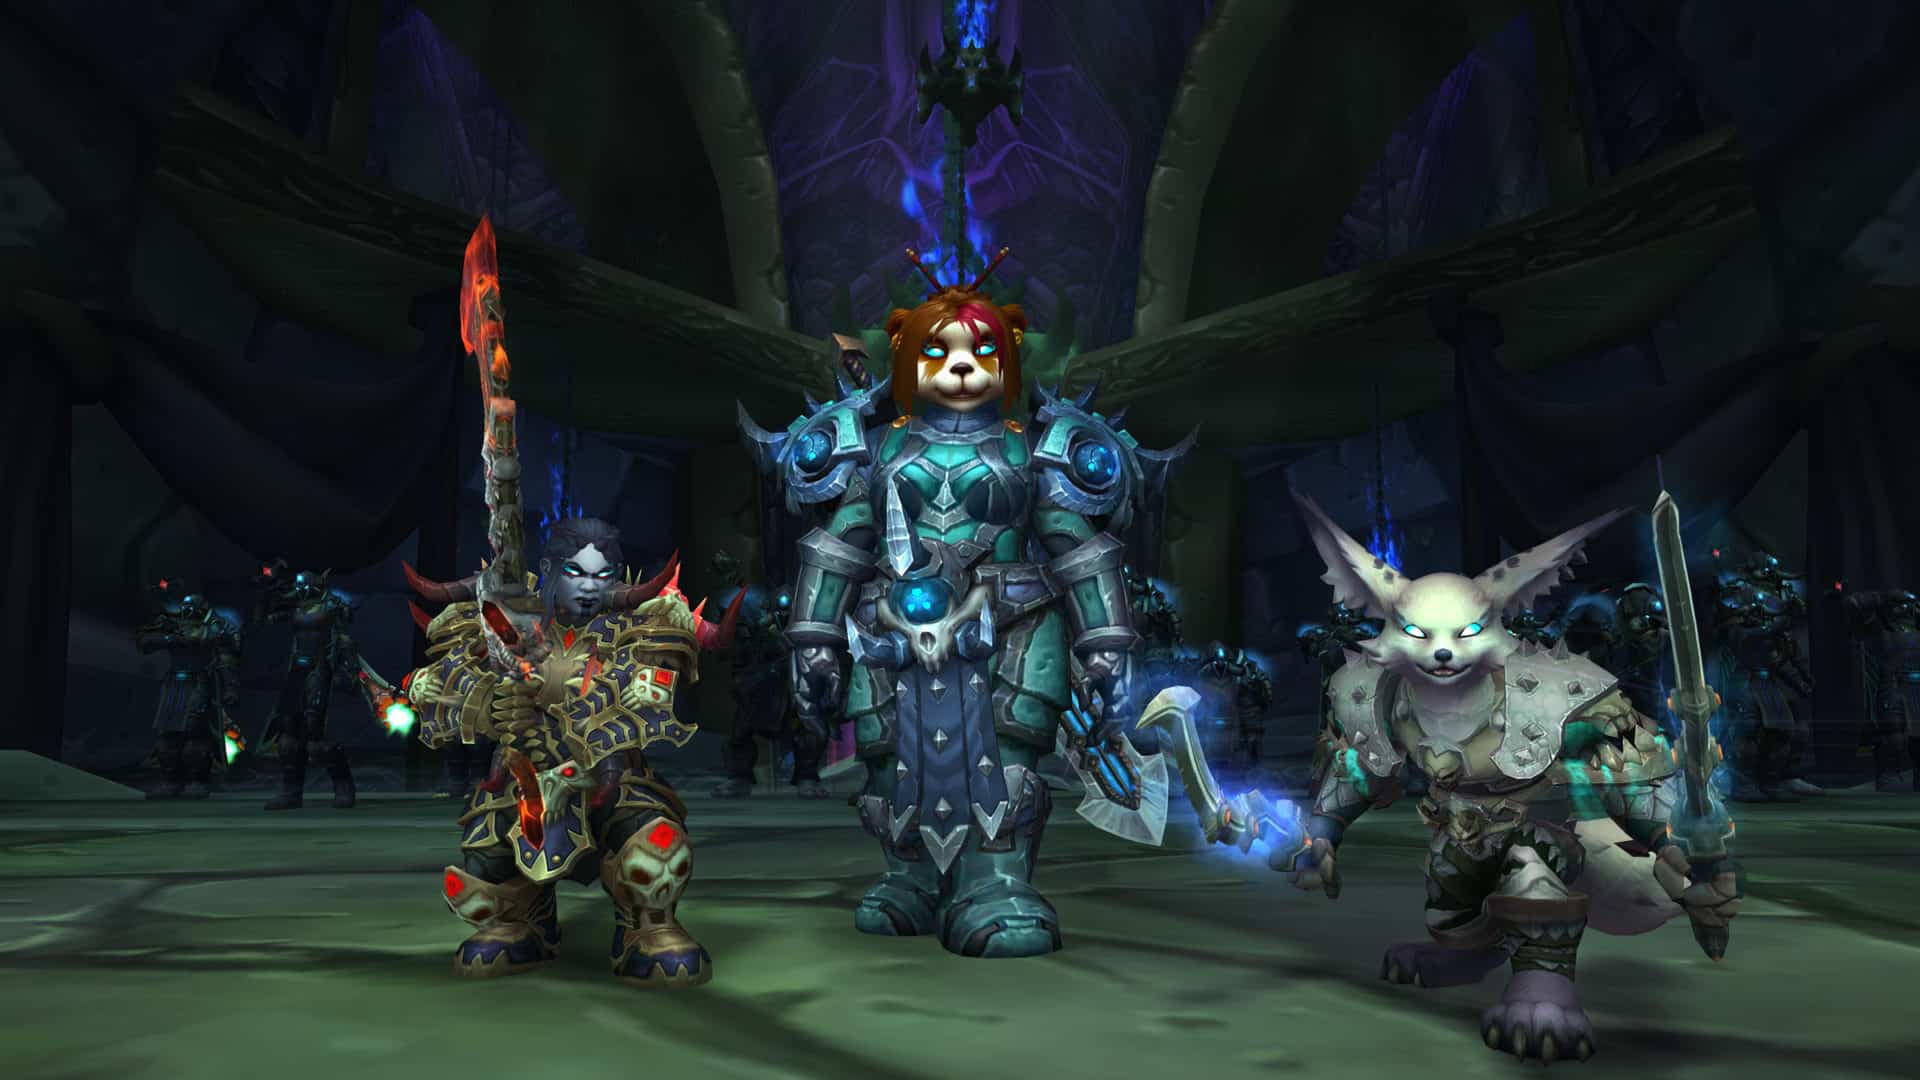 Death Knights standing together in a dark, stone room with their weapons and armor